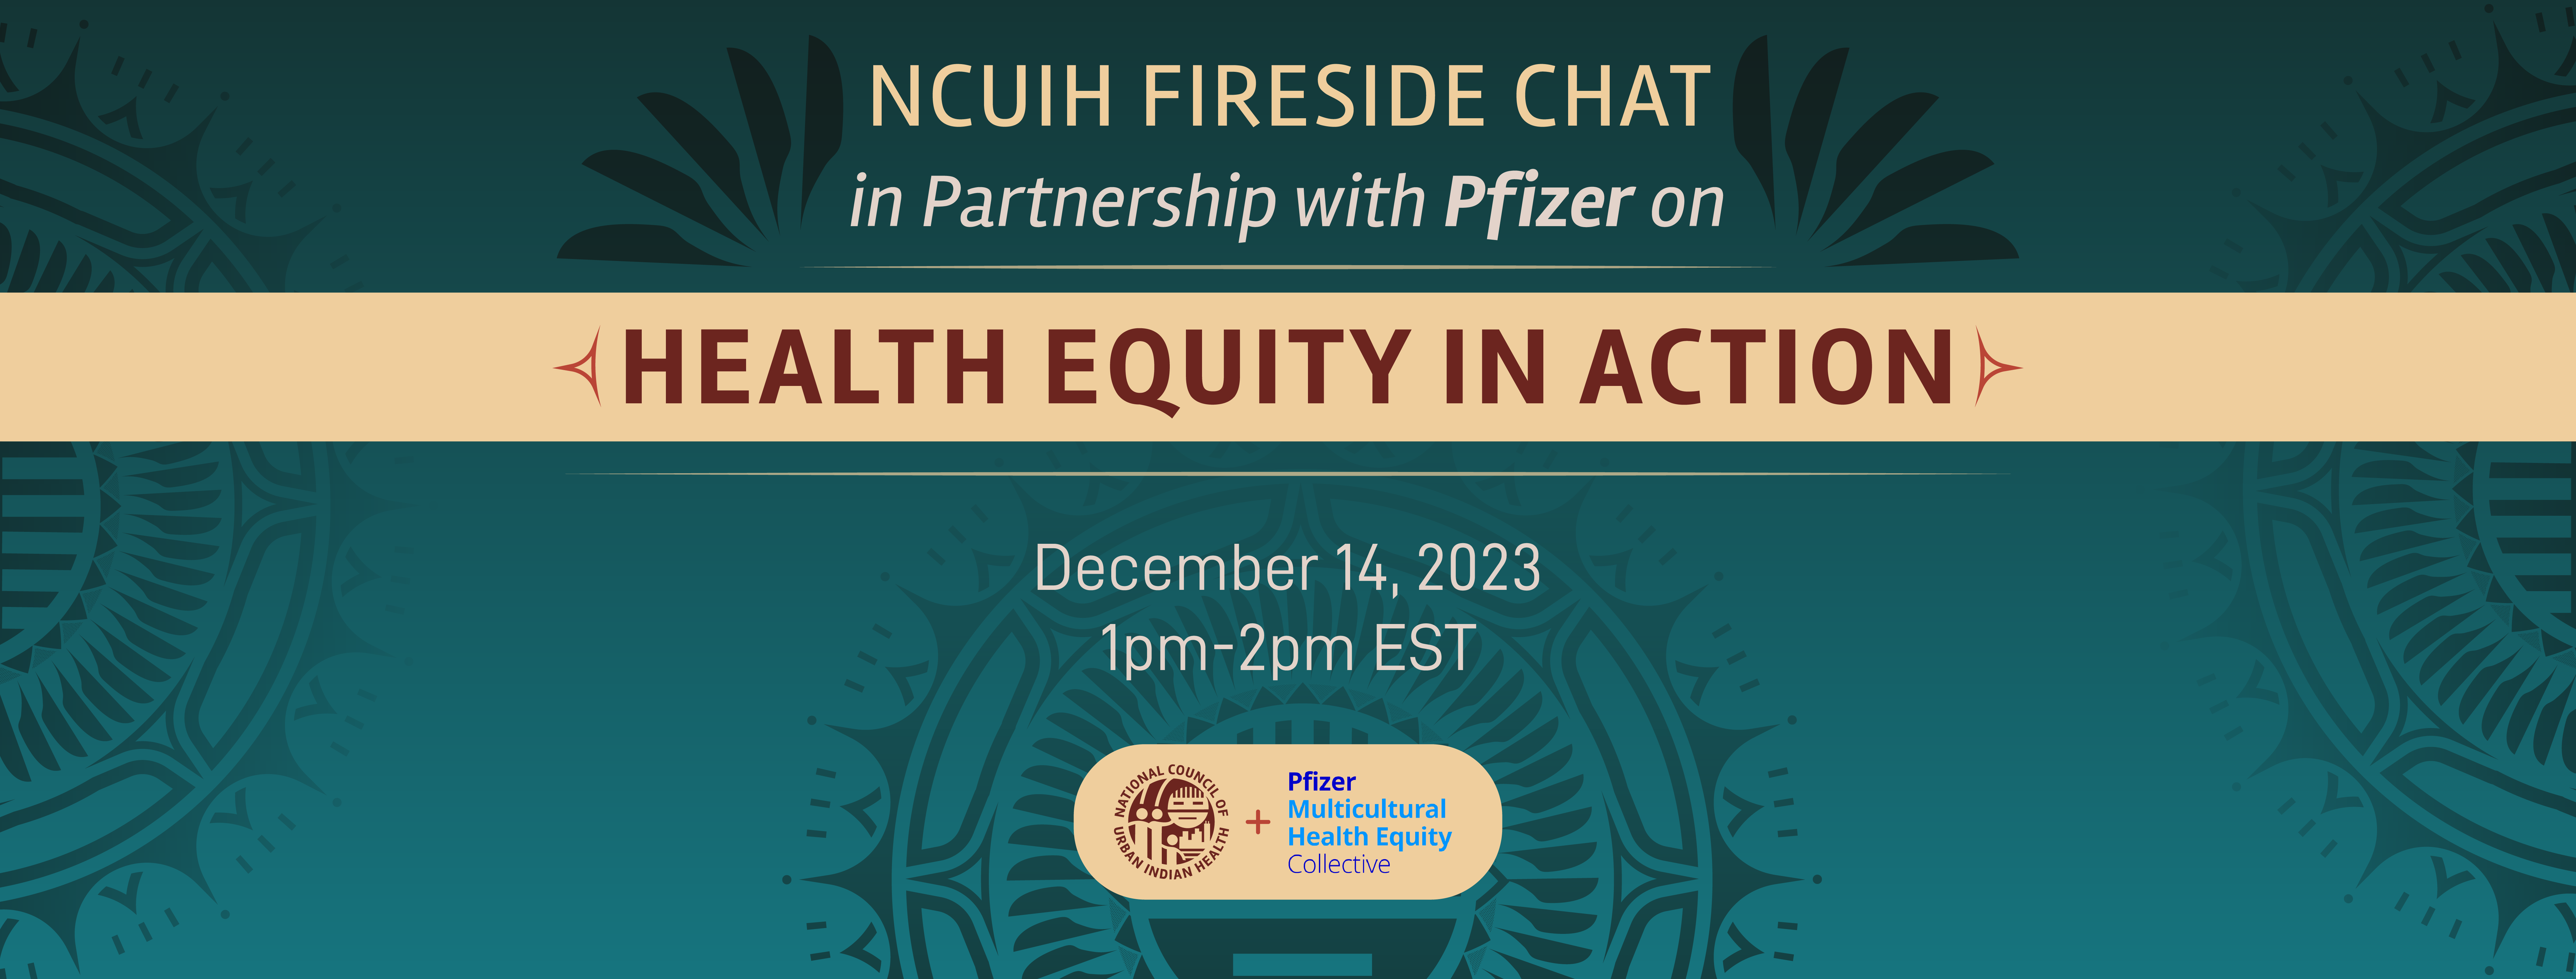 NCUIH Fireside Chat in Partnership with Pfizer on Health Equity in Action